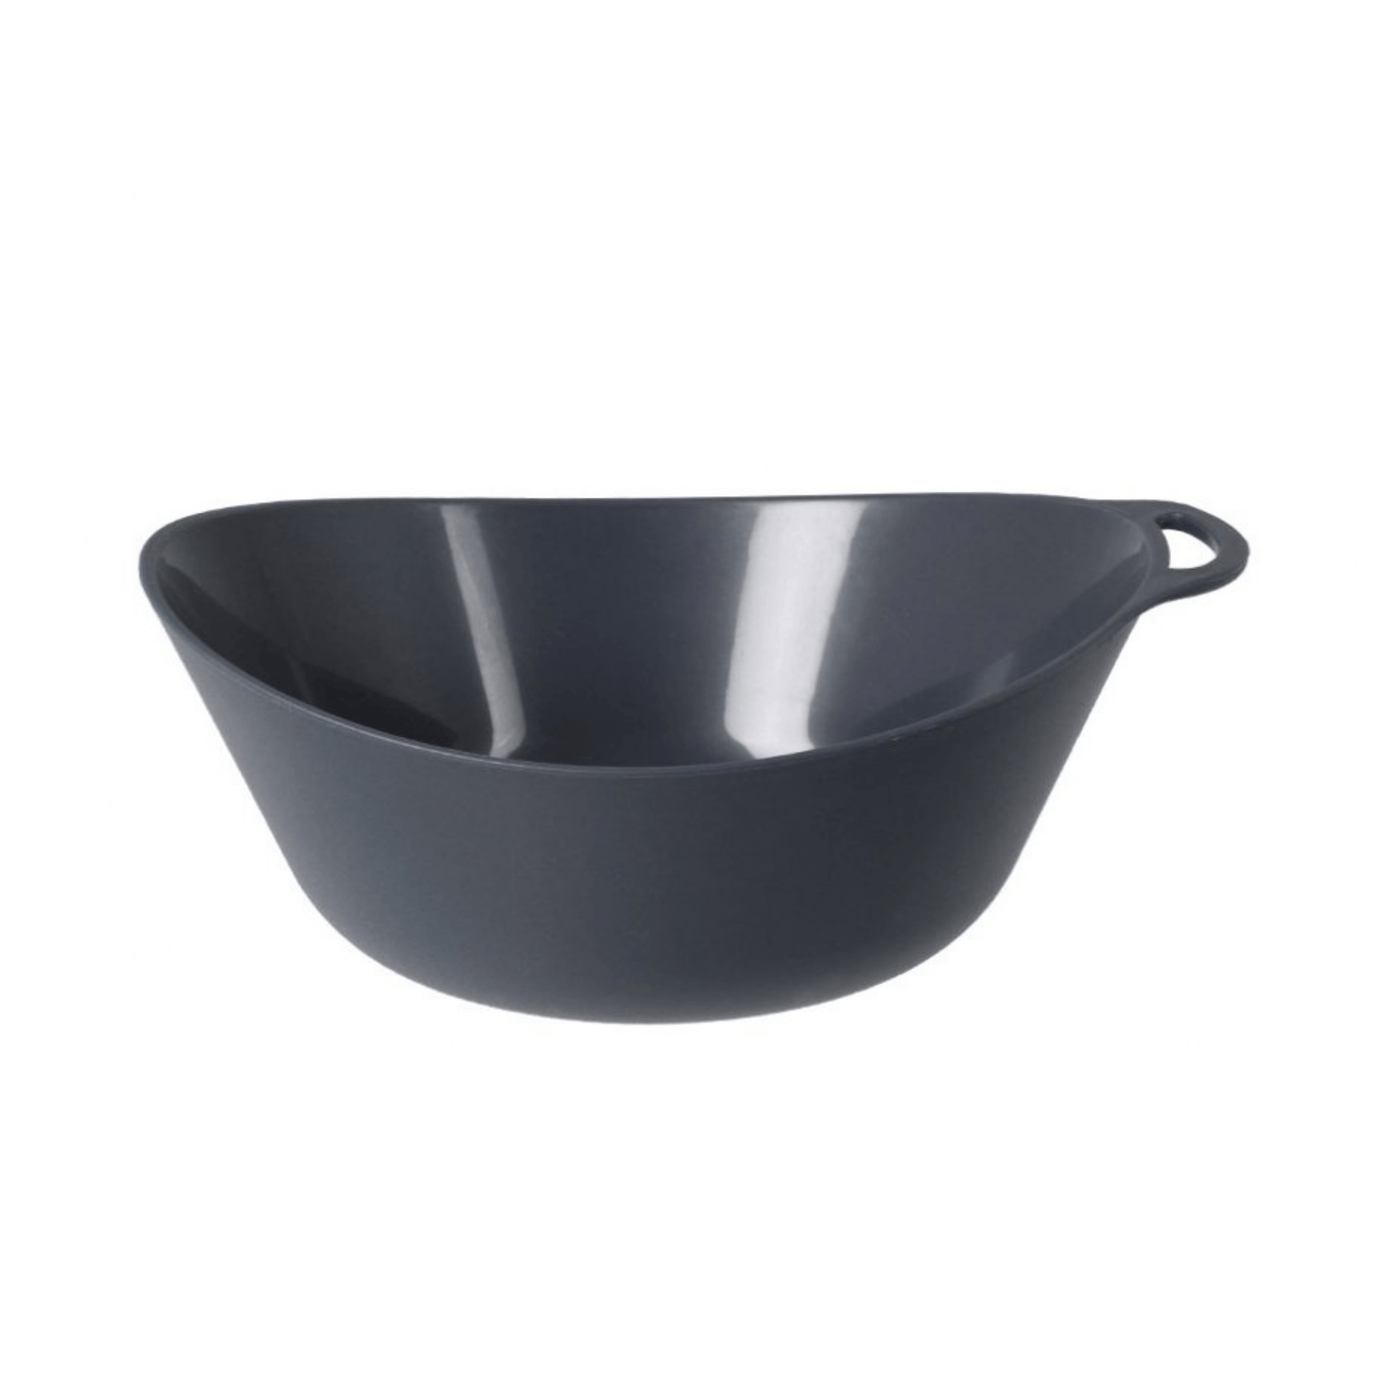 Lifeventure Ellipse Bowl | Outdoor and Camping Cookware | Further Faster Christchurch NZ #graphite